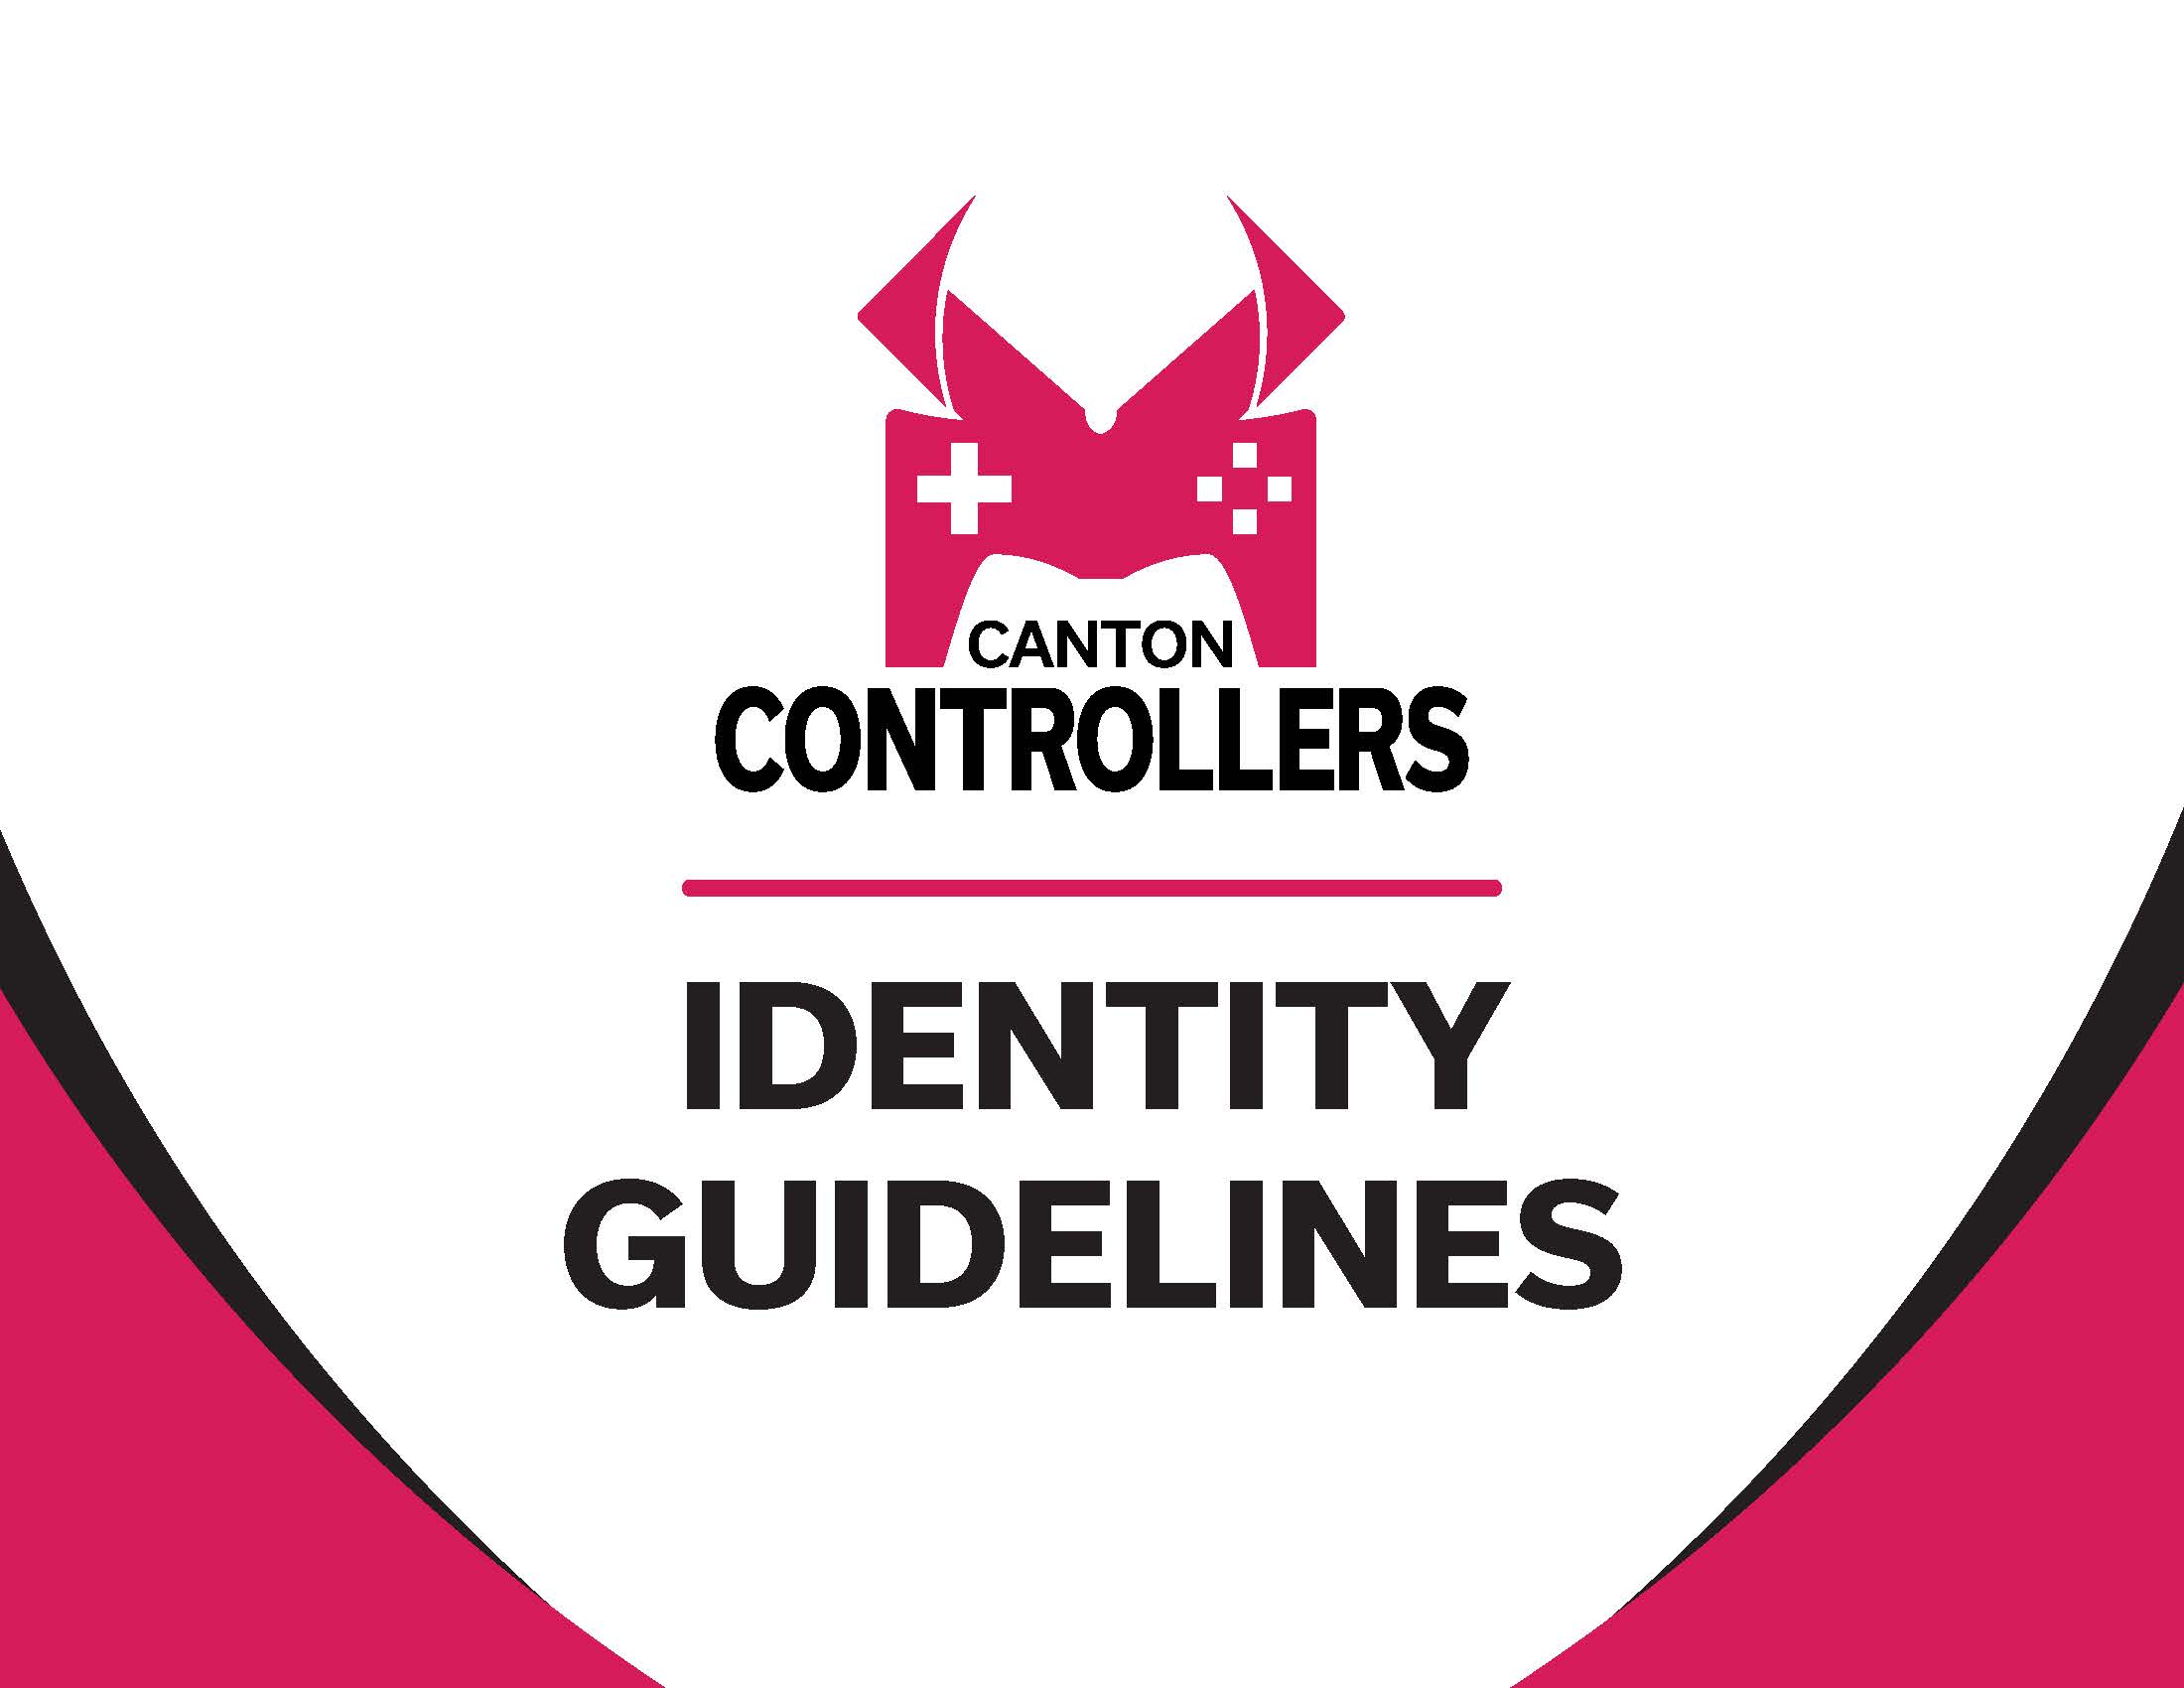 Page 1 of Canton Controllers Guidelines